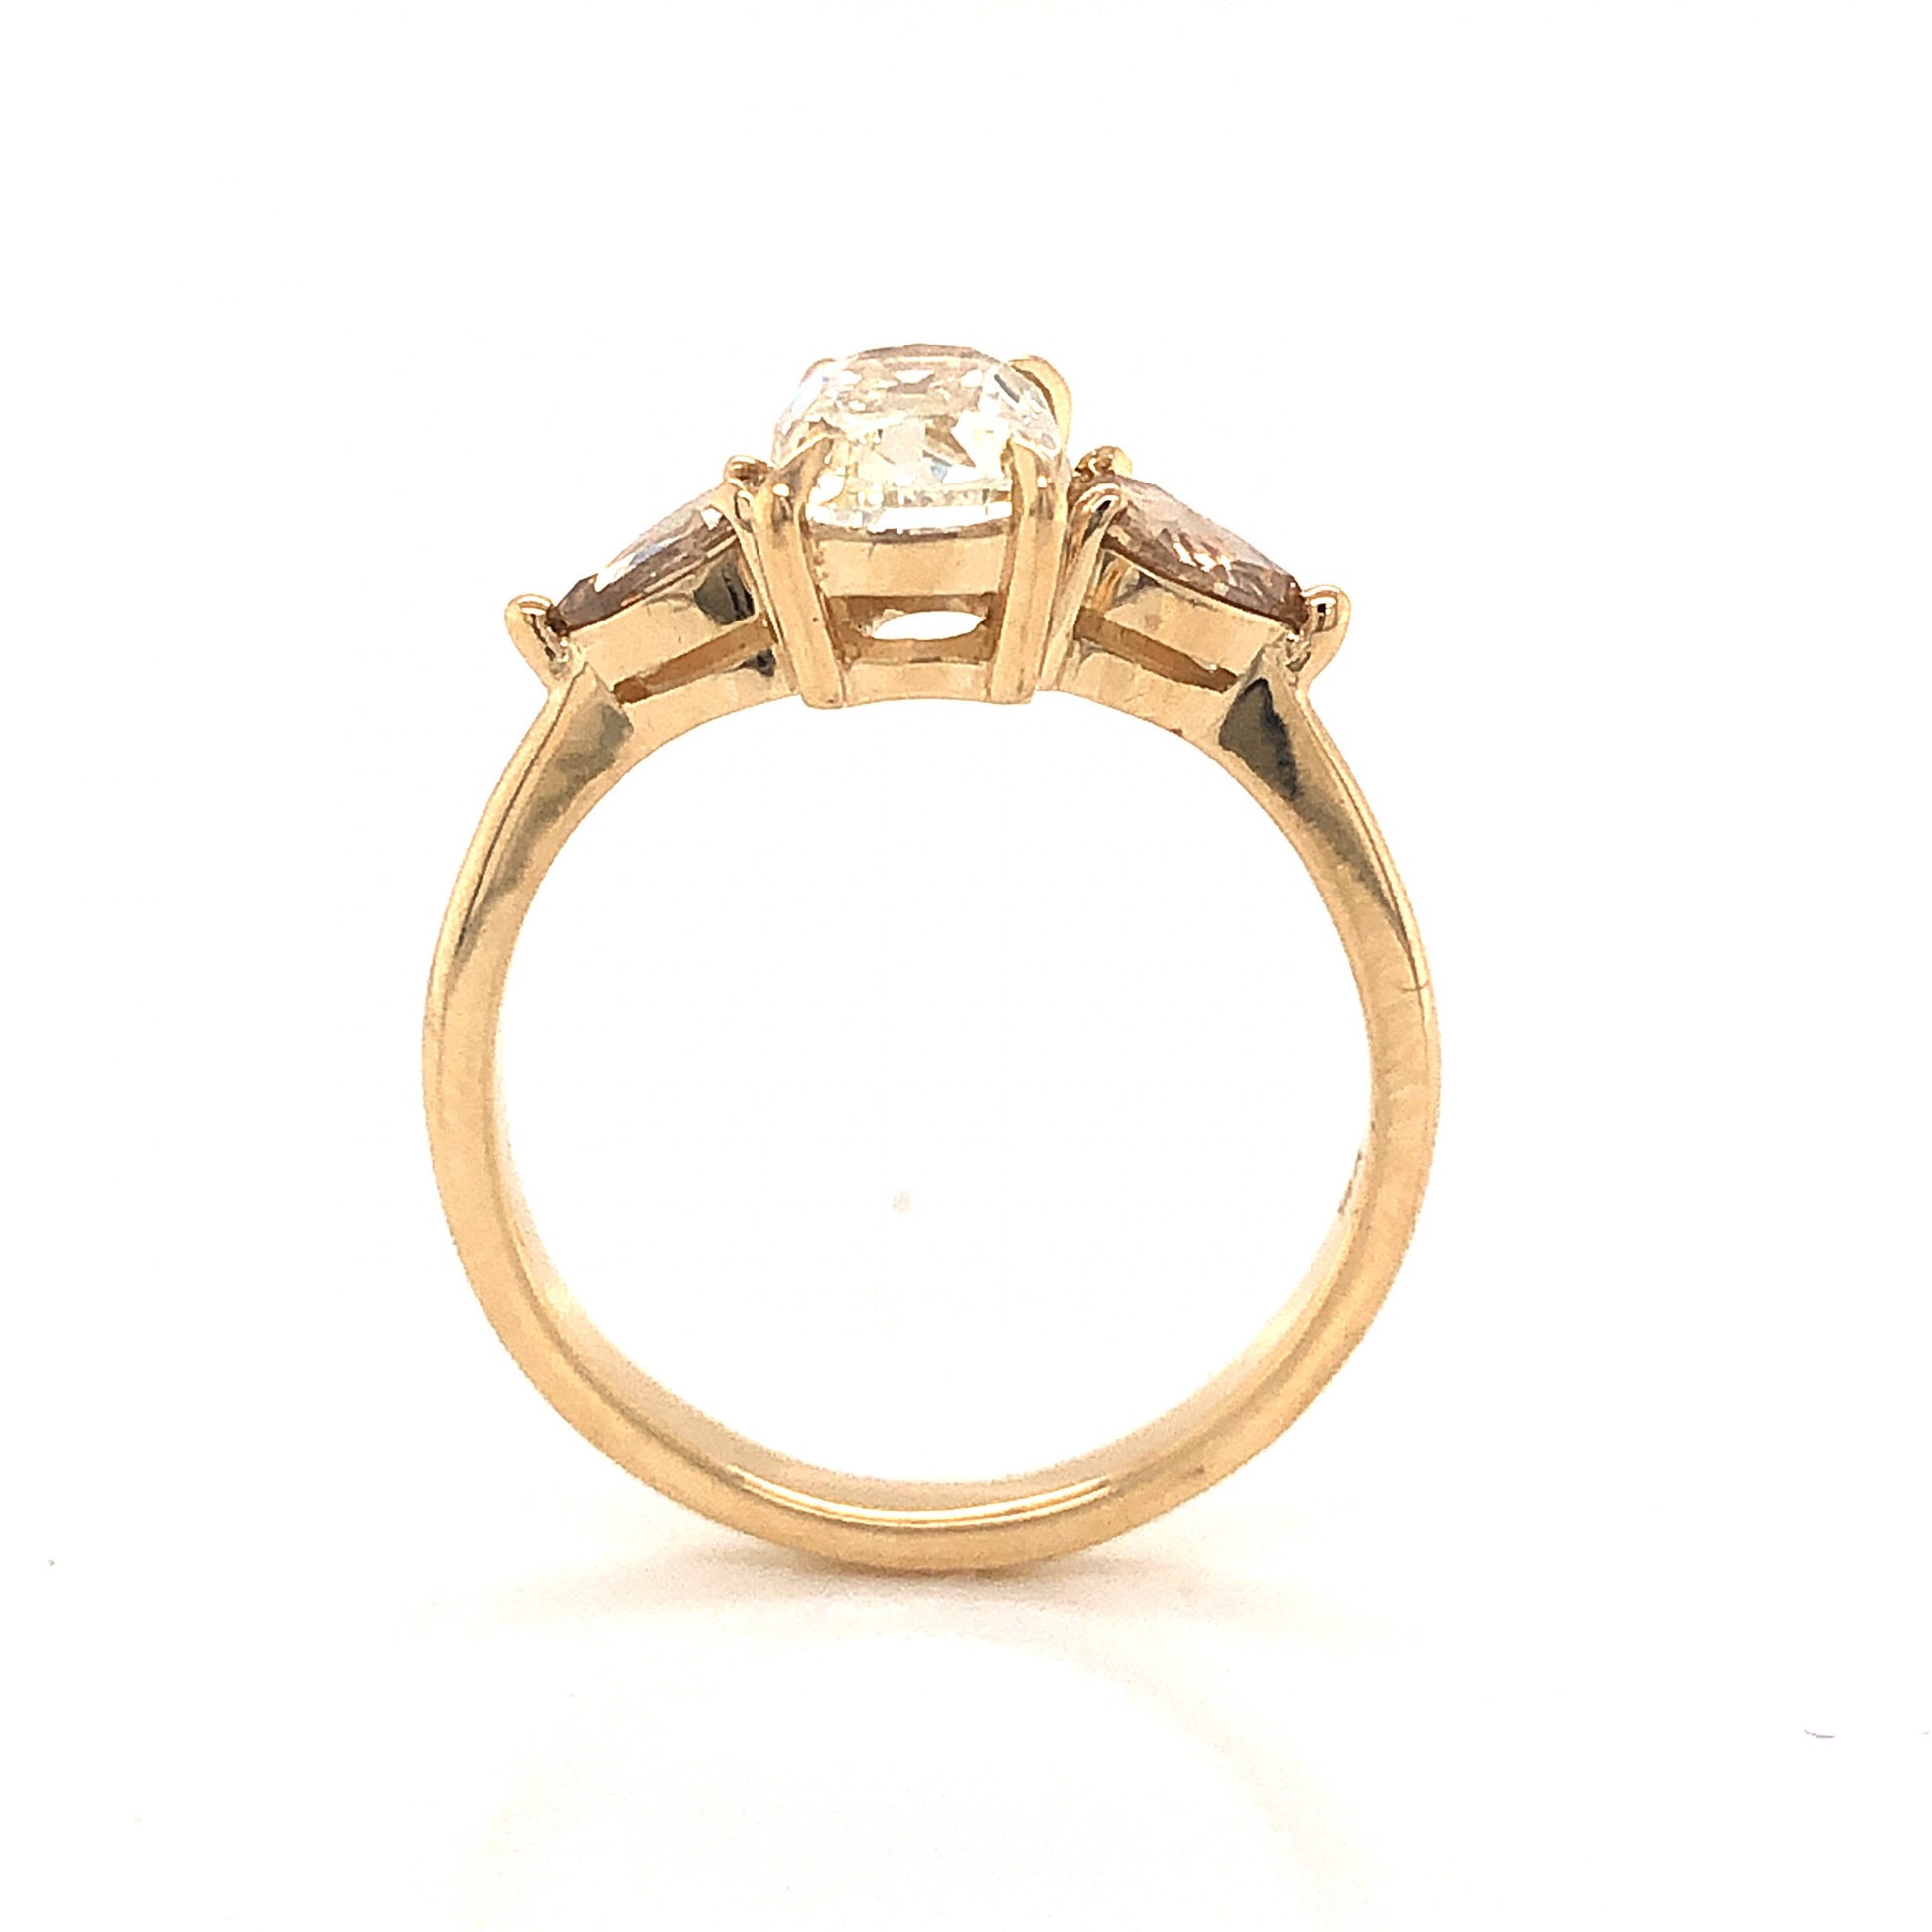 Old Mine Brilliant Cut Diamond Engagement Ring in 14k Yellow GoldComposition: 14 Karat Yellow Gold Ring Size: 6.25 Total Diamond Weight: 1.68ct Total Gram Weight: 3.3 g Inscription: 14k 
      